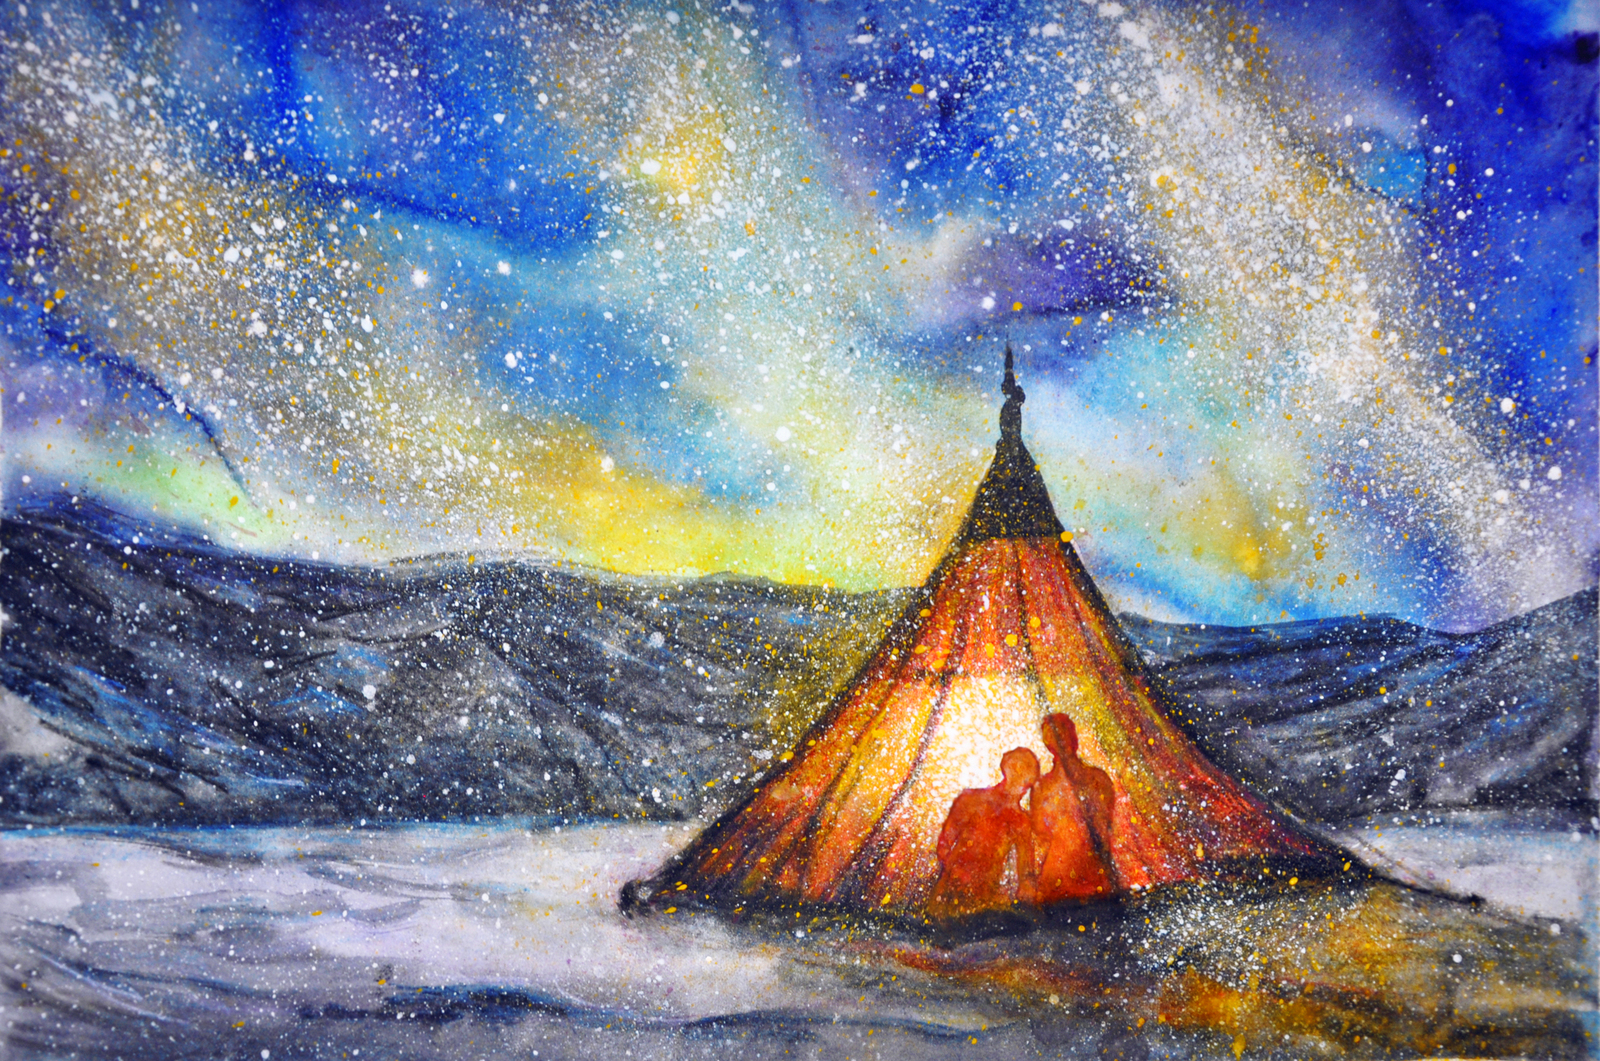 A short video with an illustration on the theme of the Northern Lights. Romance. My - My, Watercolor, Polar Lights, Drawing, Stars, Landscape, Creation, Illustrations, Video, Stars